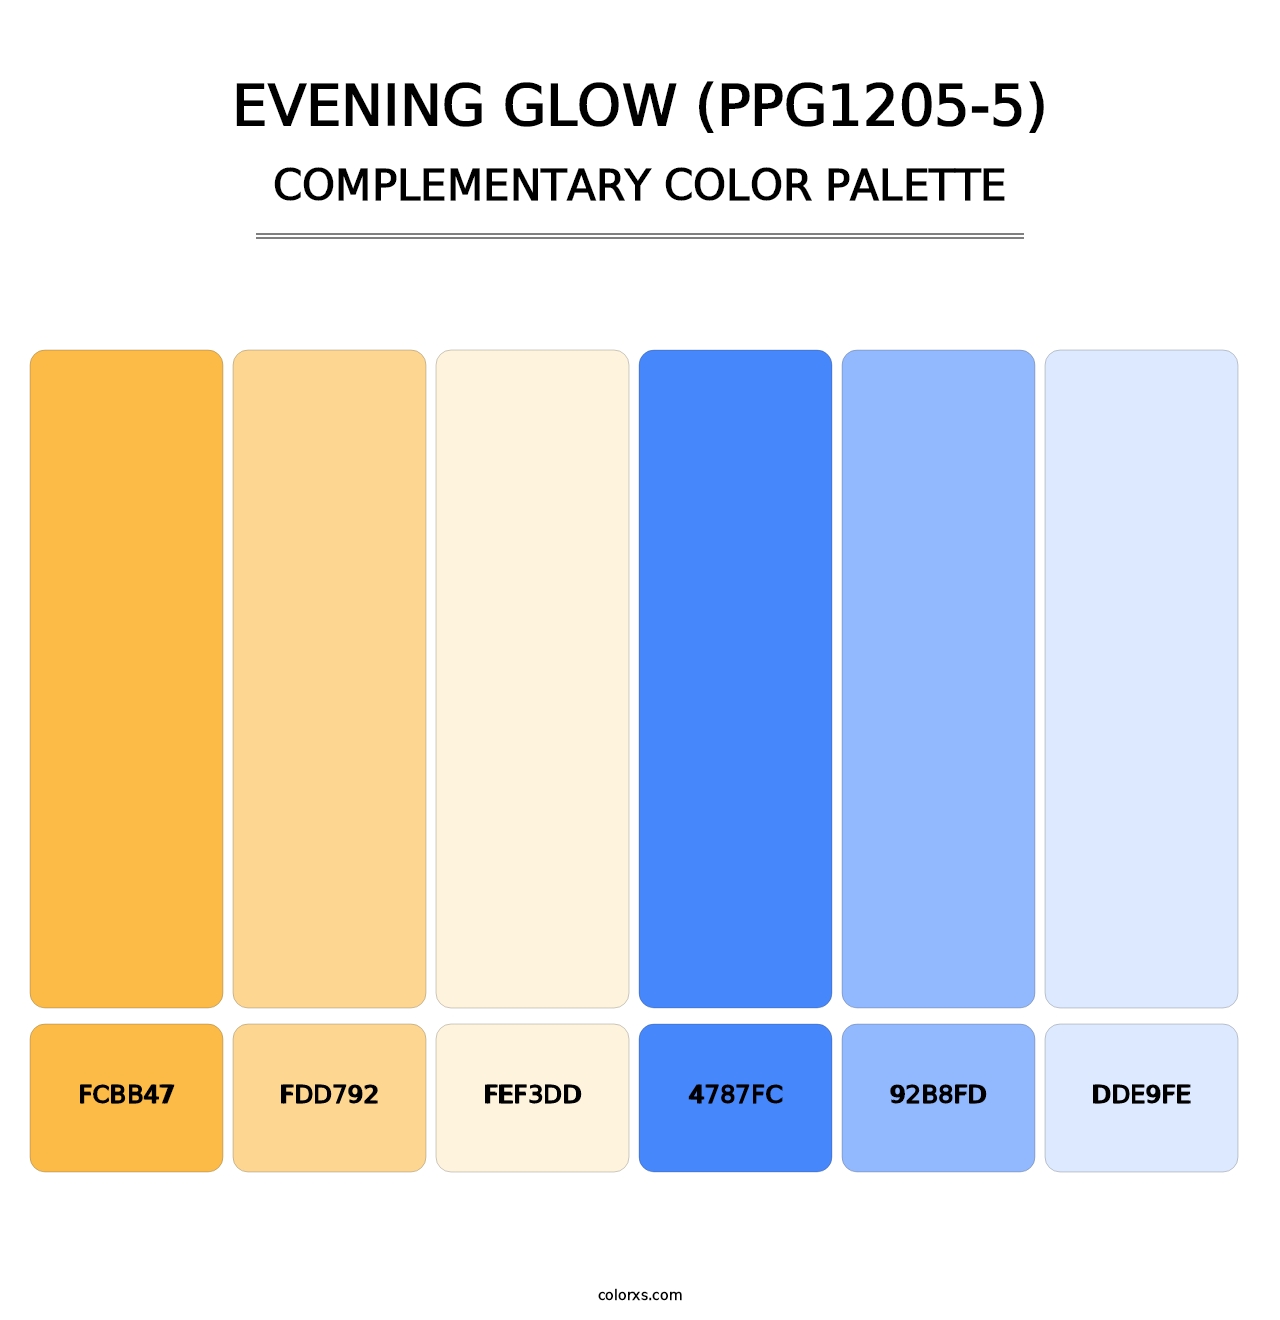 Evening Glow (PPG1205-5) - Complementary Color Palette